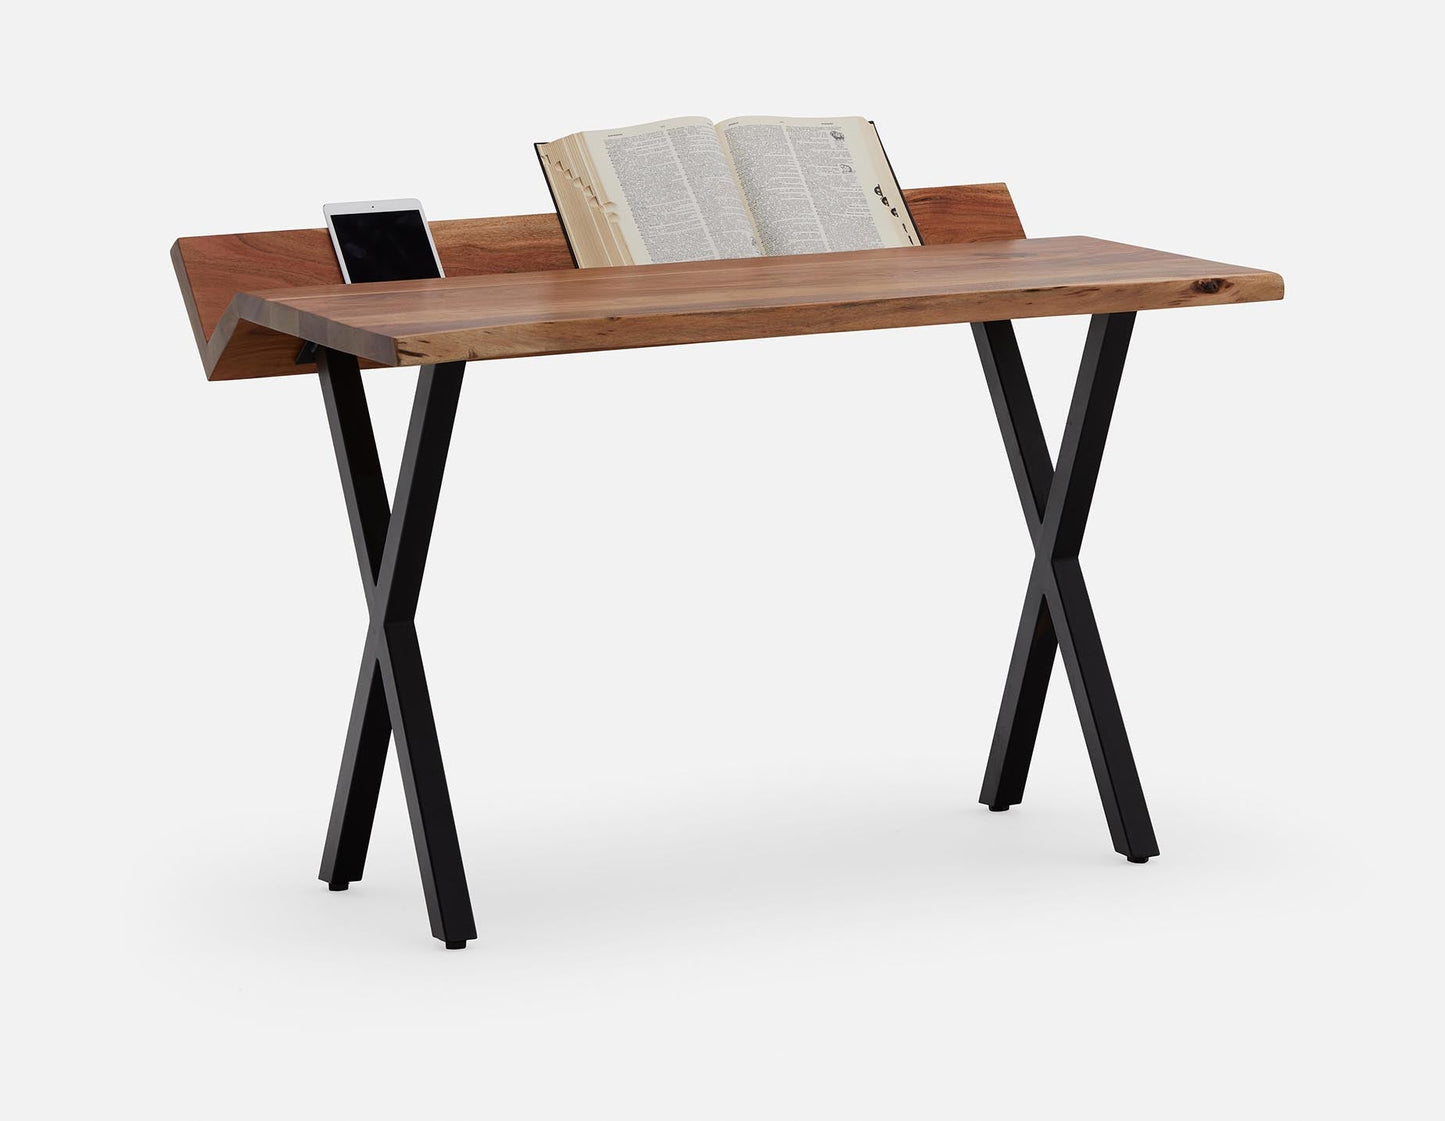 Asger Live Edge Desk with Open Trench Storage